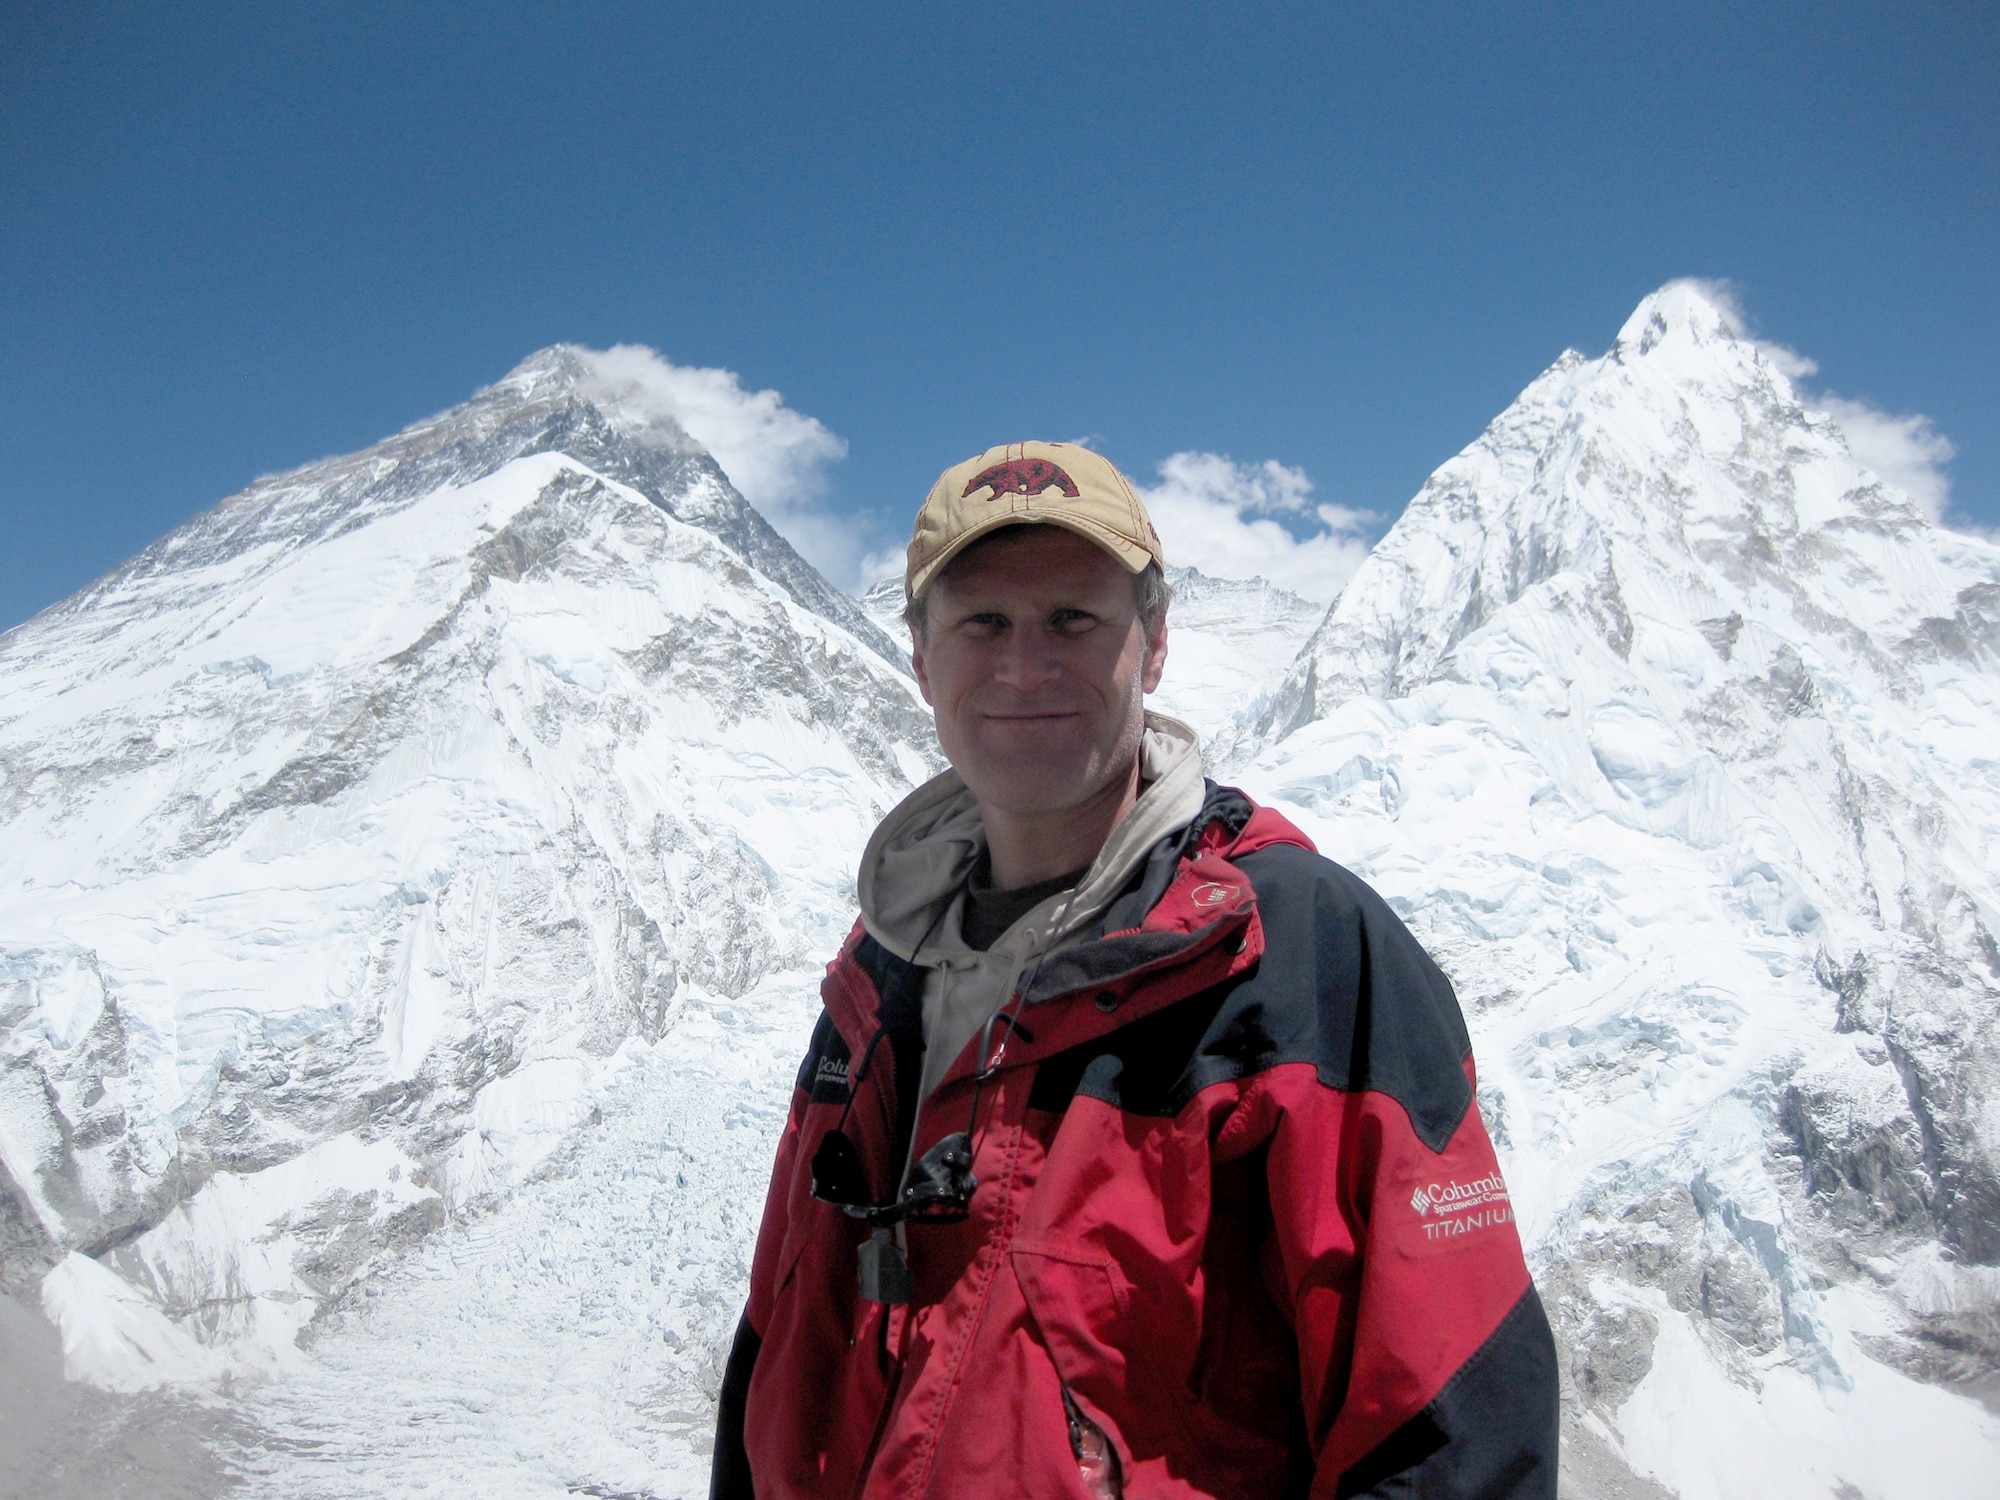 Lt. Col. Peter Solie acclimates while standing at Mount Pumori Advanced Base Camp with the Mount Everest summit pyramid over his left shoulder May 17, 2010, in Nepal. Colonel Solie reached the summit May 17. Colonel Solie is the Air Force Space Command Space Safety Division chief. (Courtesy photo) 